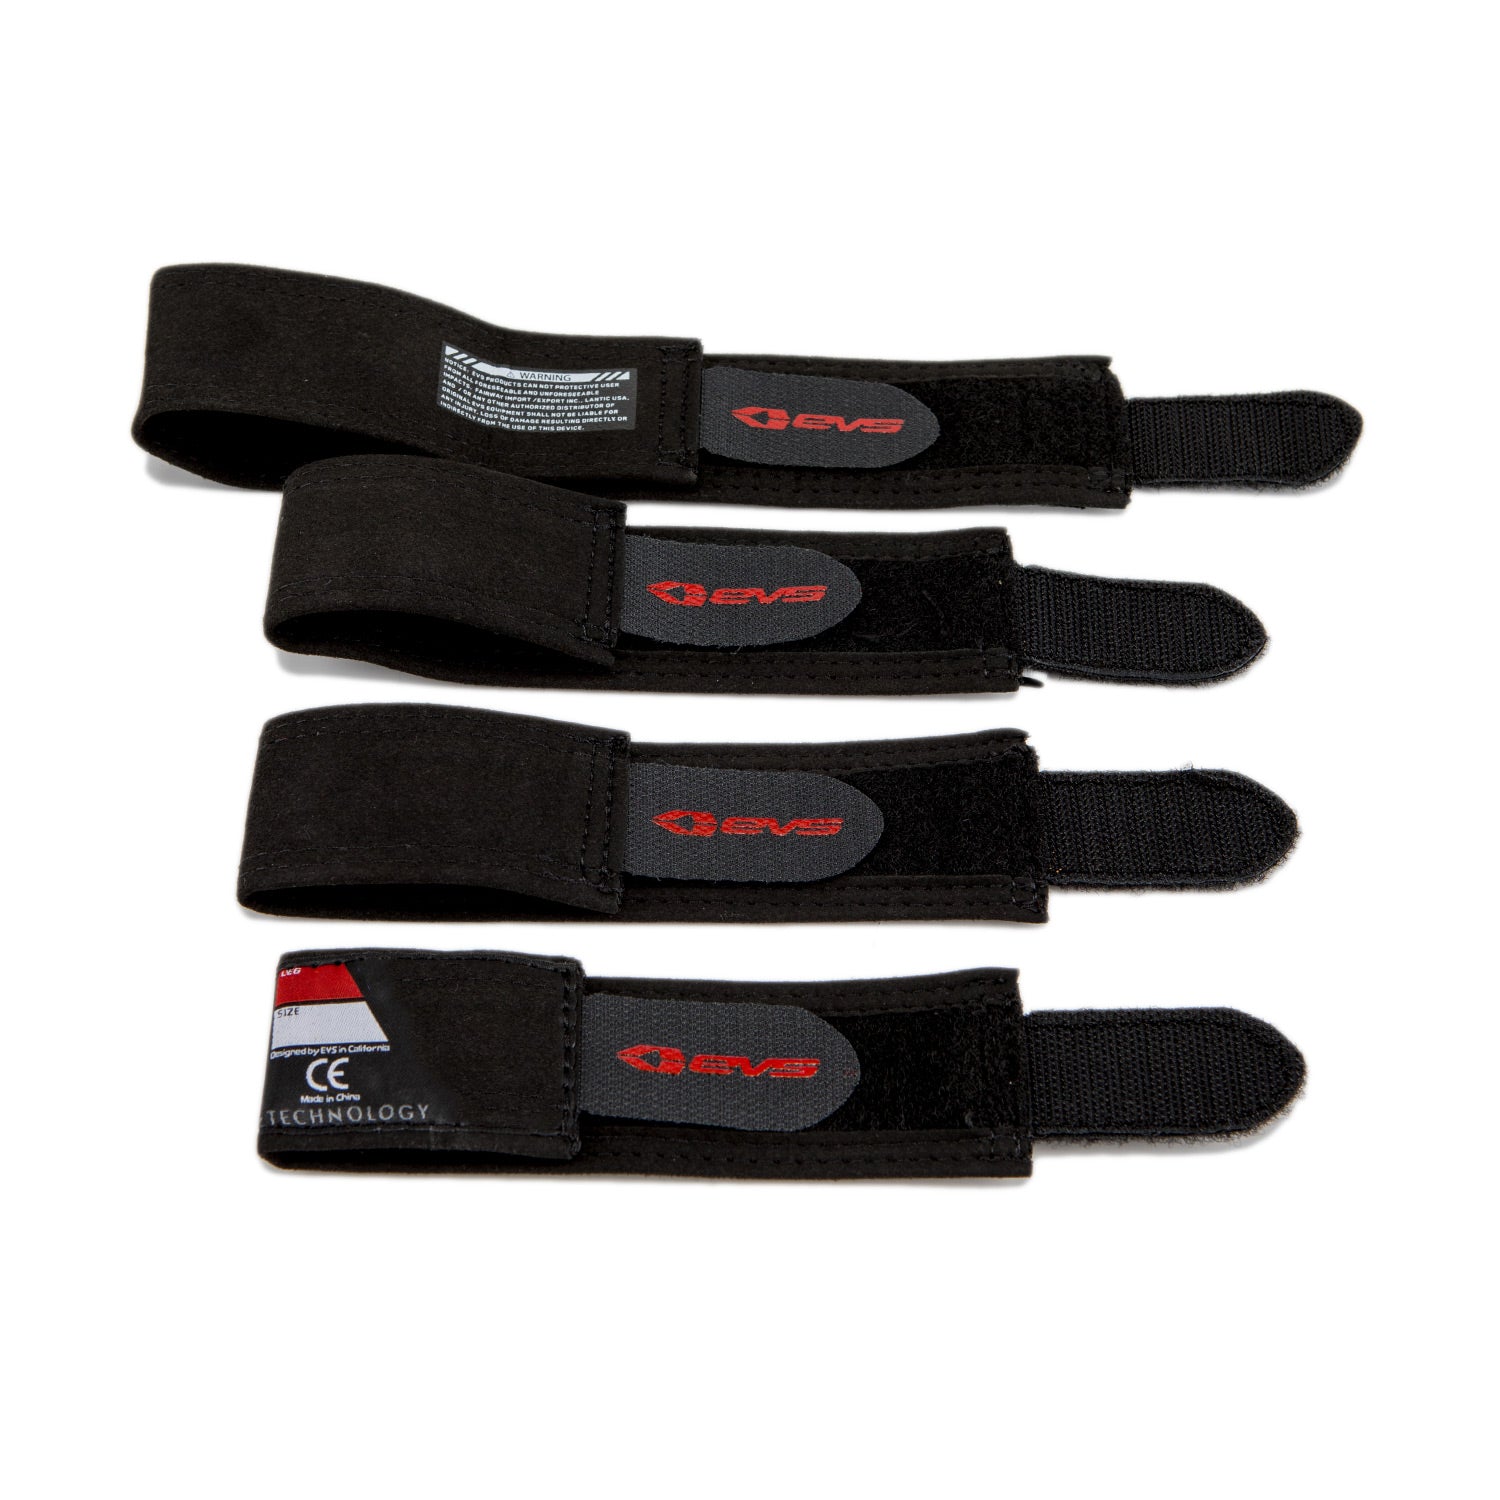 Axis & Web Knee Brace Replacement Straps